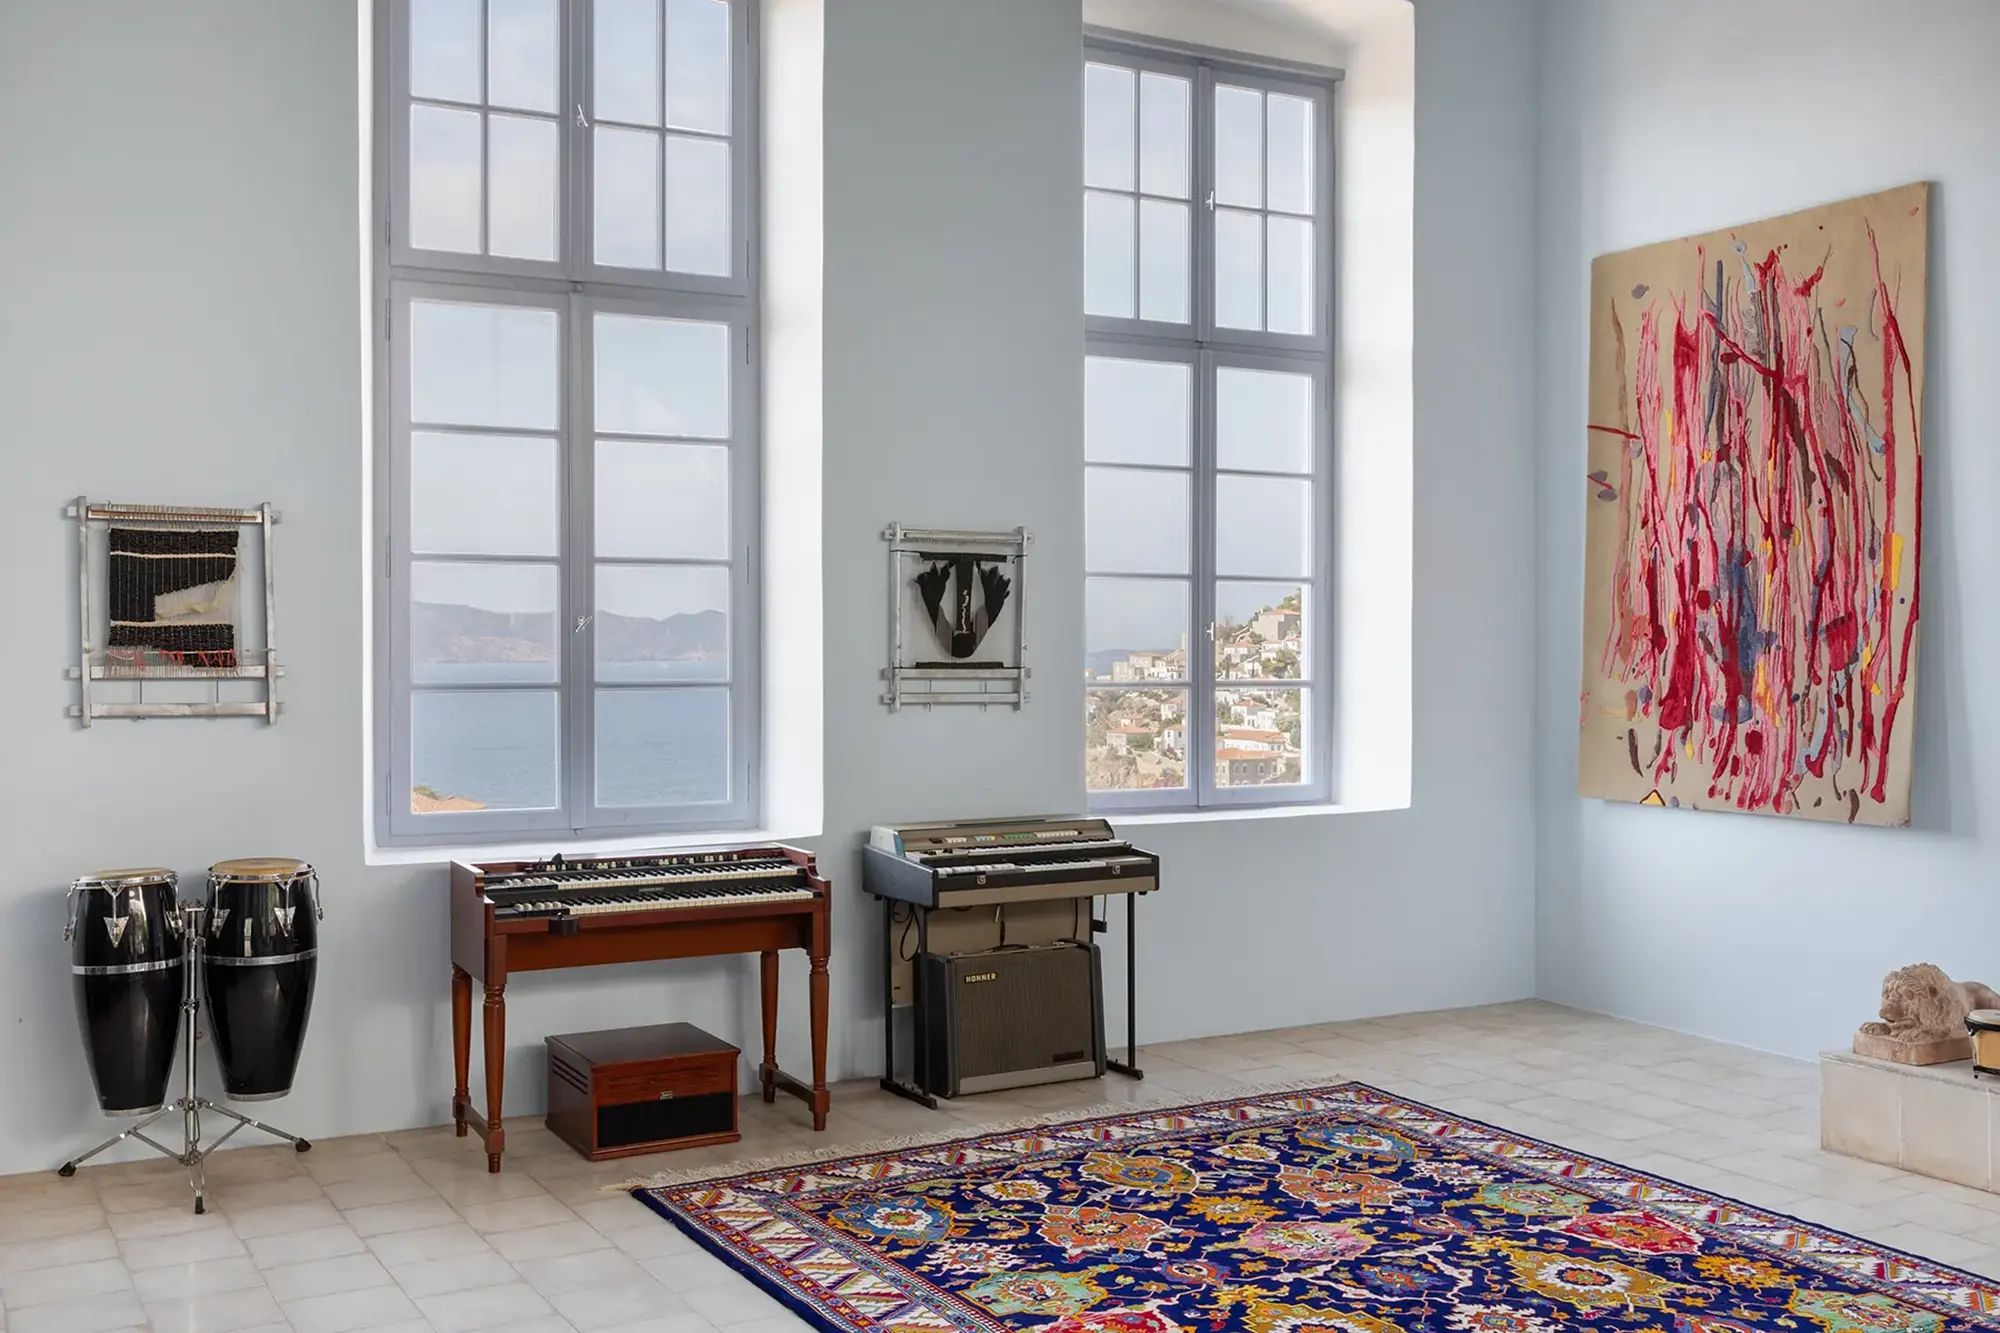 hydra island and art, 2024, old carpet factory in collaboration with the artists helen marden and dimitrios antonitsis with warp of time exhibition